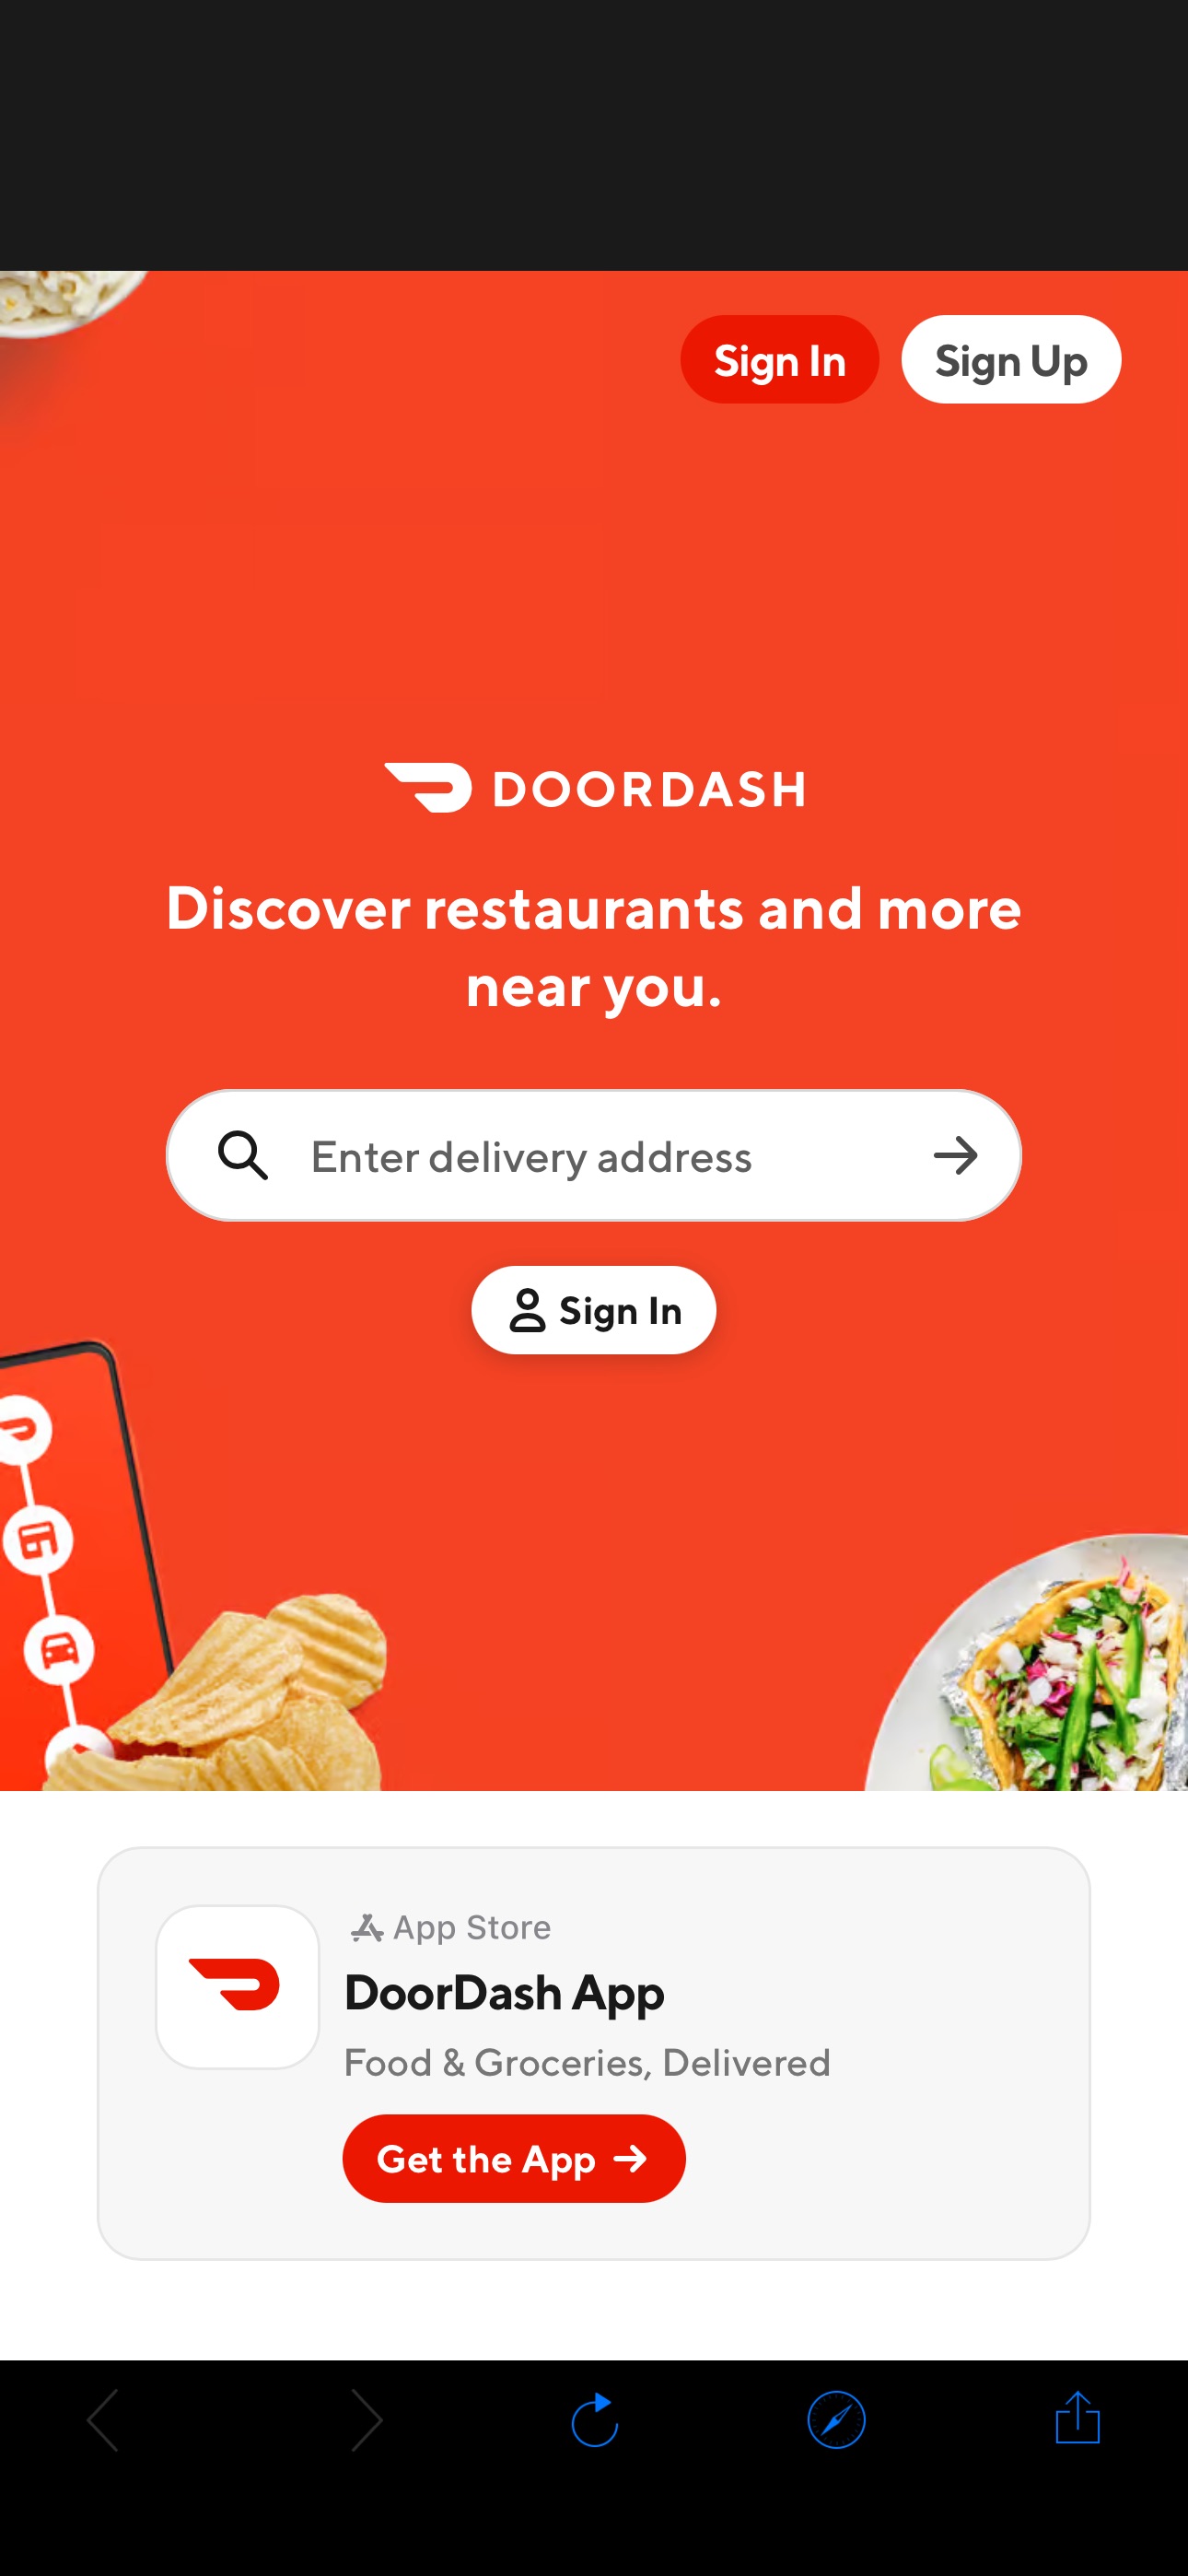 DoorDash Food Delivery & Takeout - From Restaurants Near You